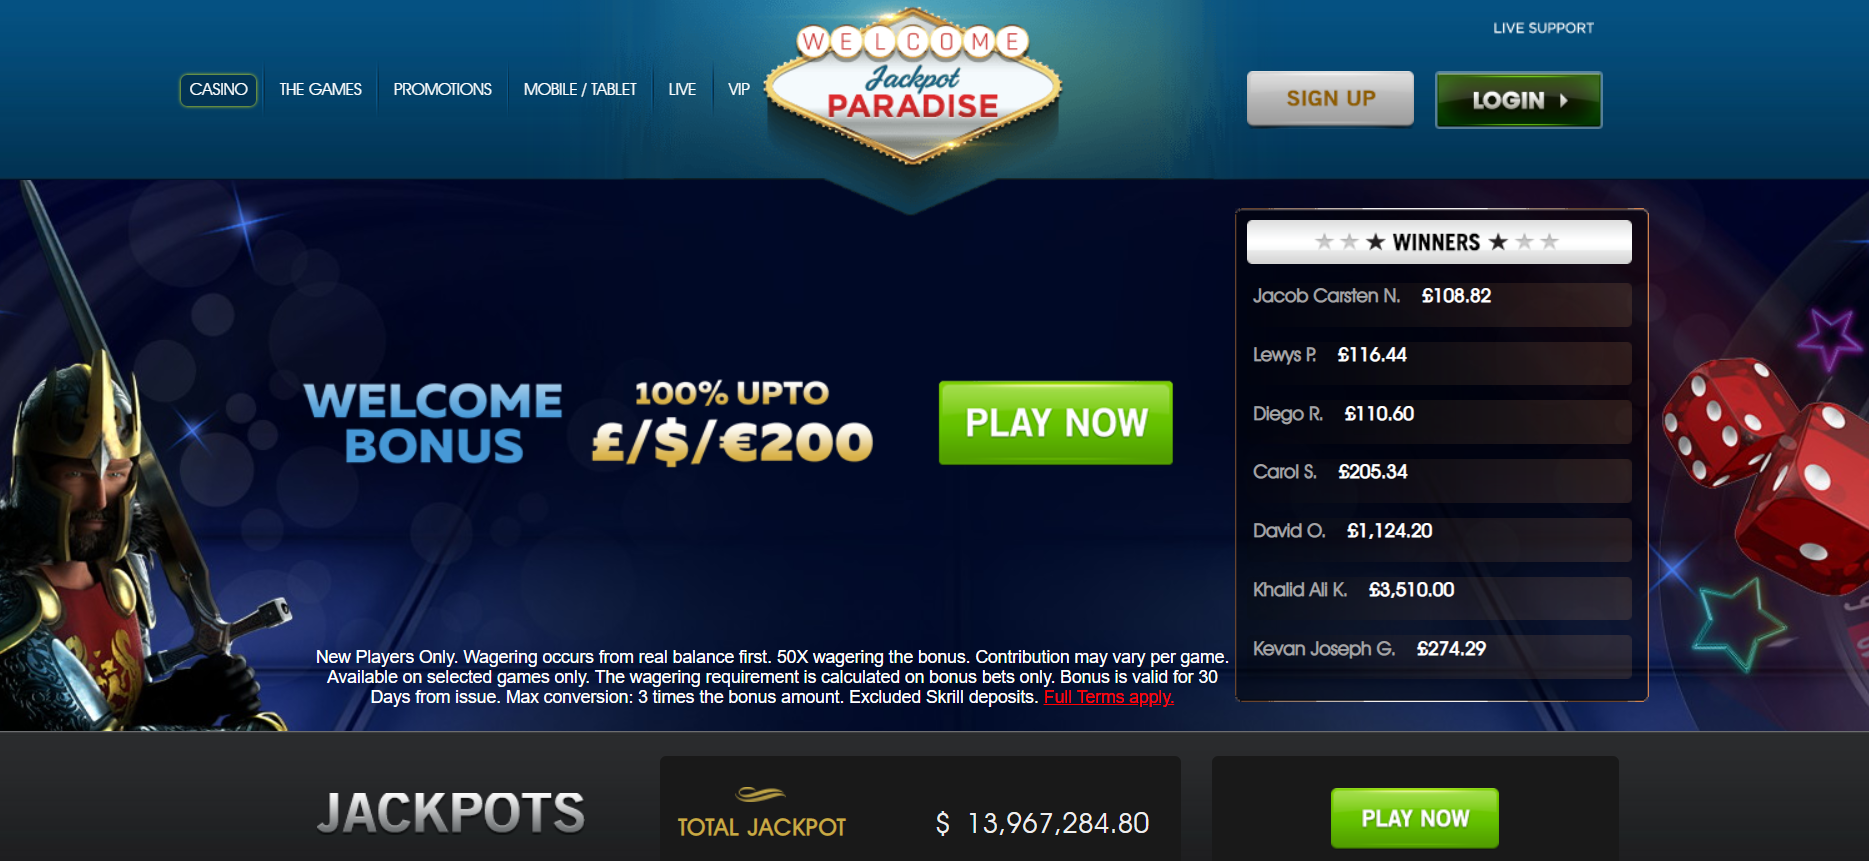 Jackpot Paradise review, bonus, free spins, and real player reviews